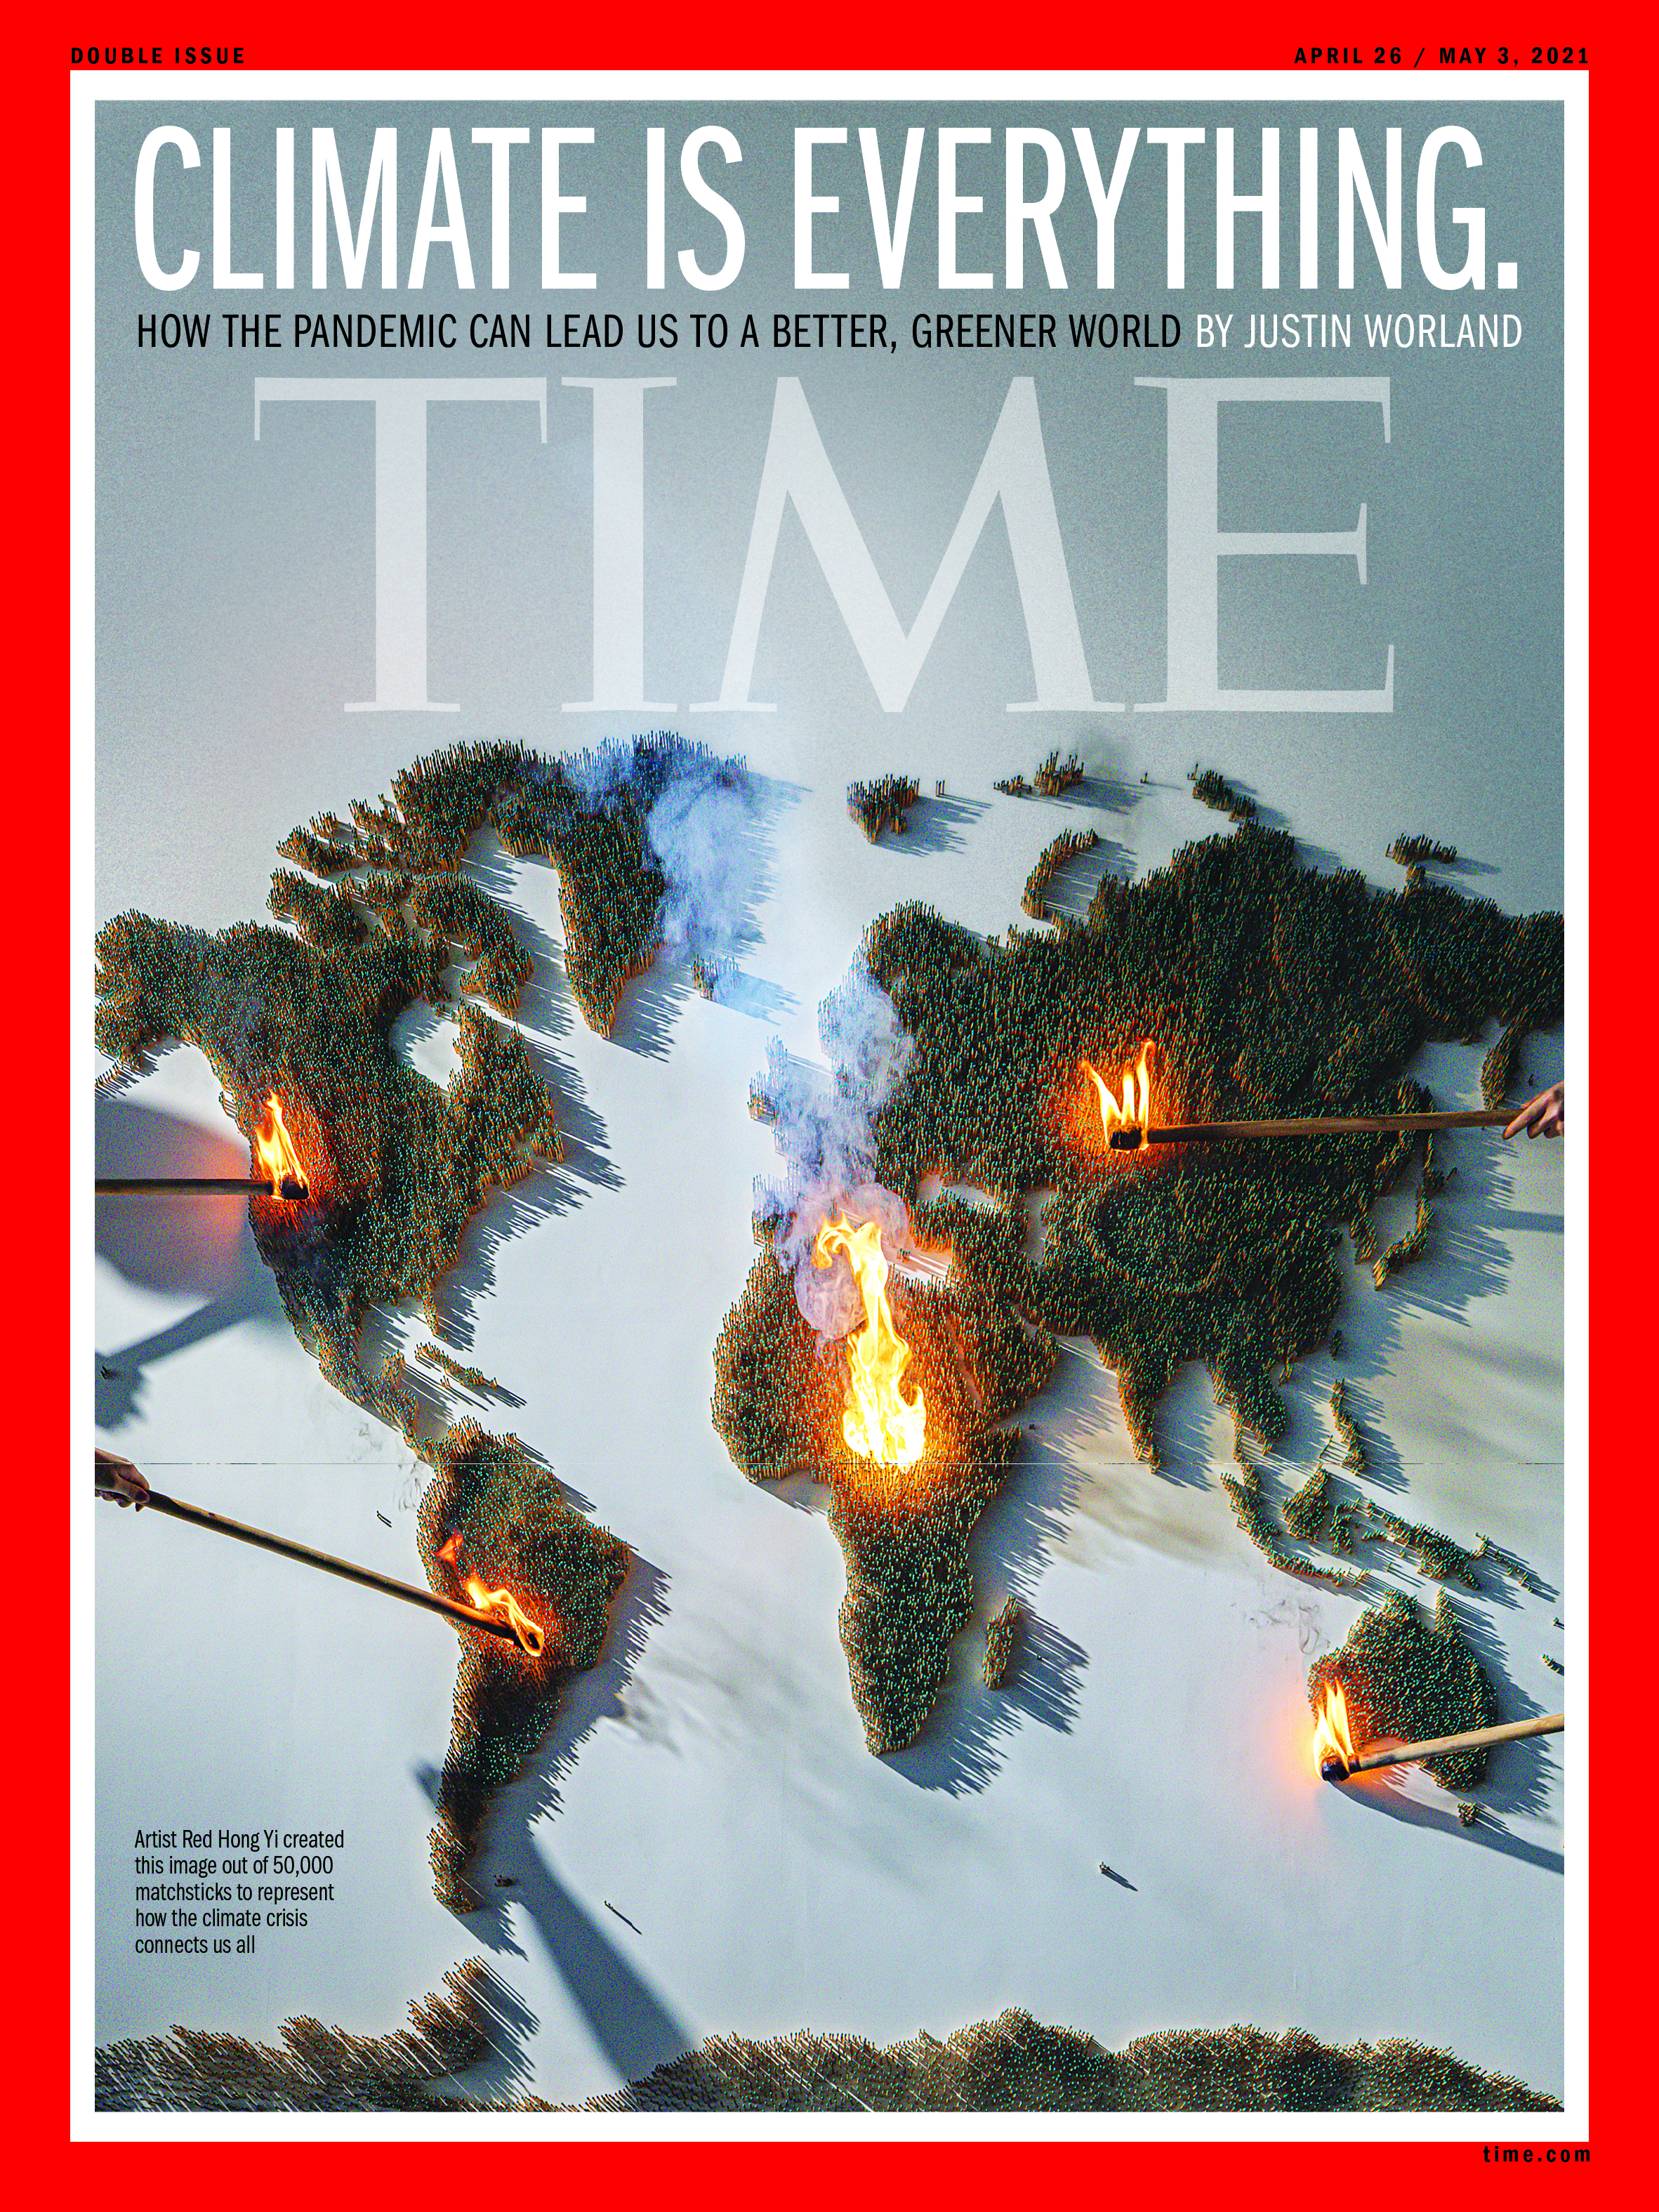 TIME - "Climate Is Everything," April 26-May 3, 2021